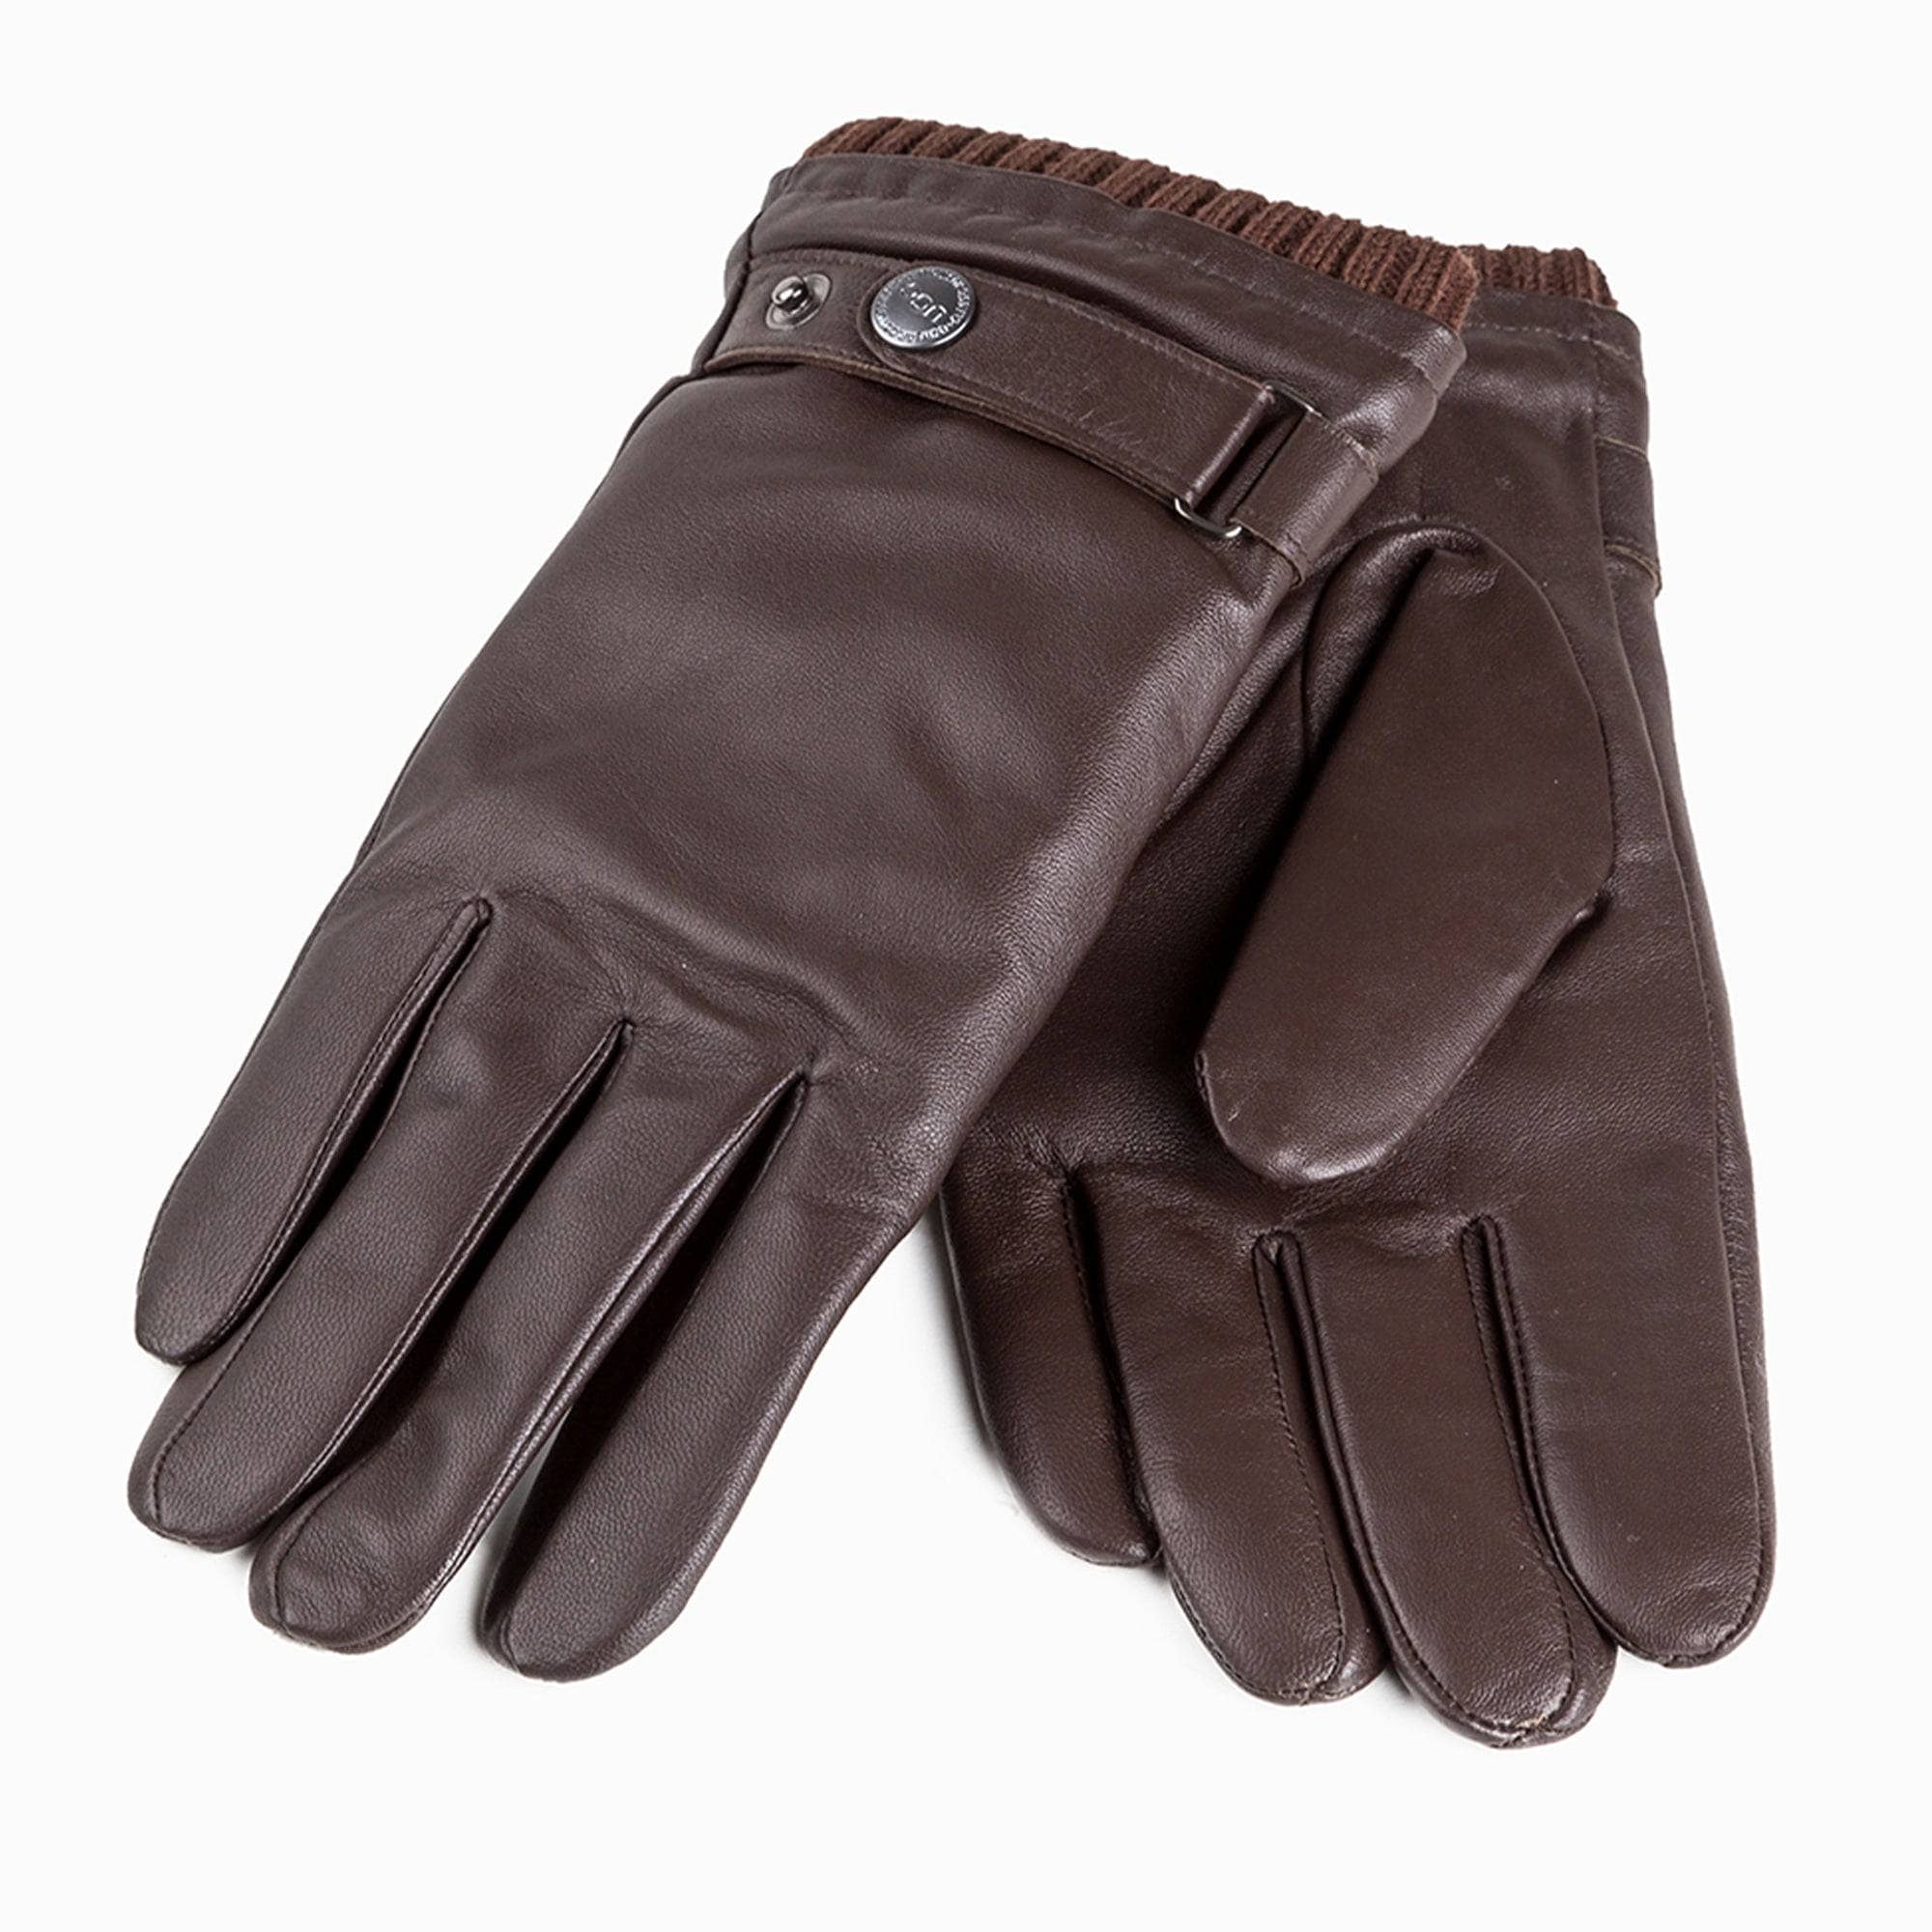 UGG Premium Touch Screen Men's Silver Stud Gloves